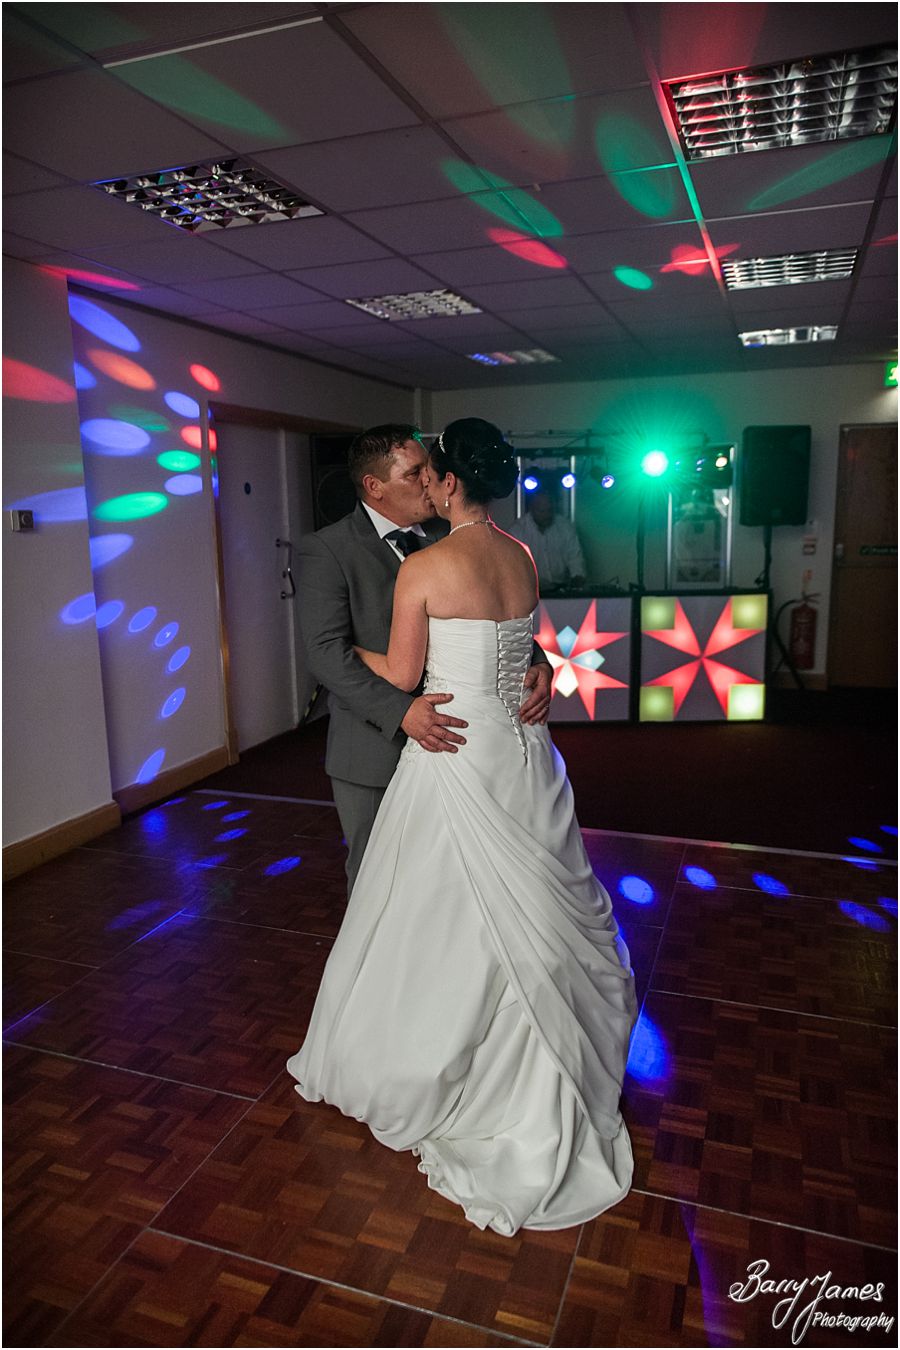 Capturing the first dance and evening reception at The Ramada in Cannock by Professional Contemporary Candid and Creative Wedding Photographer Barry James